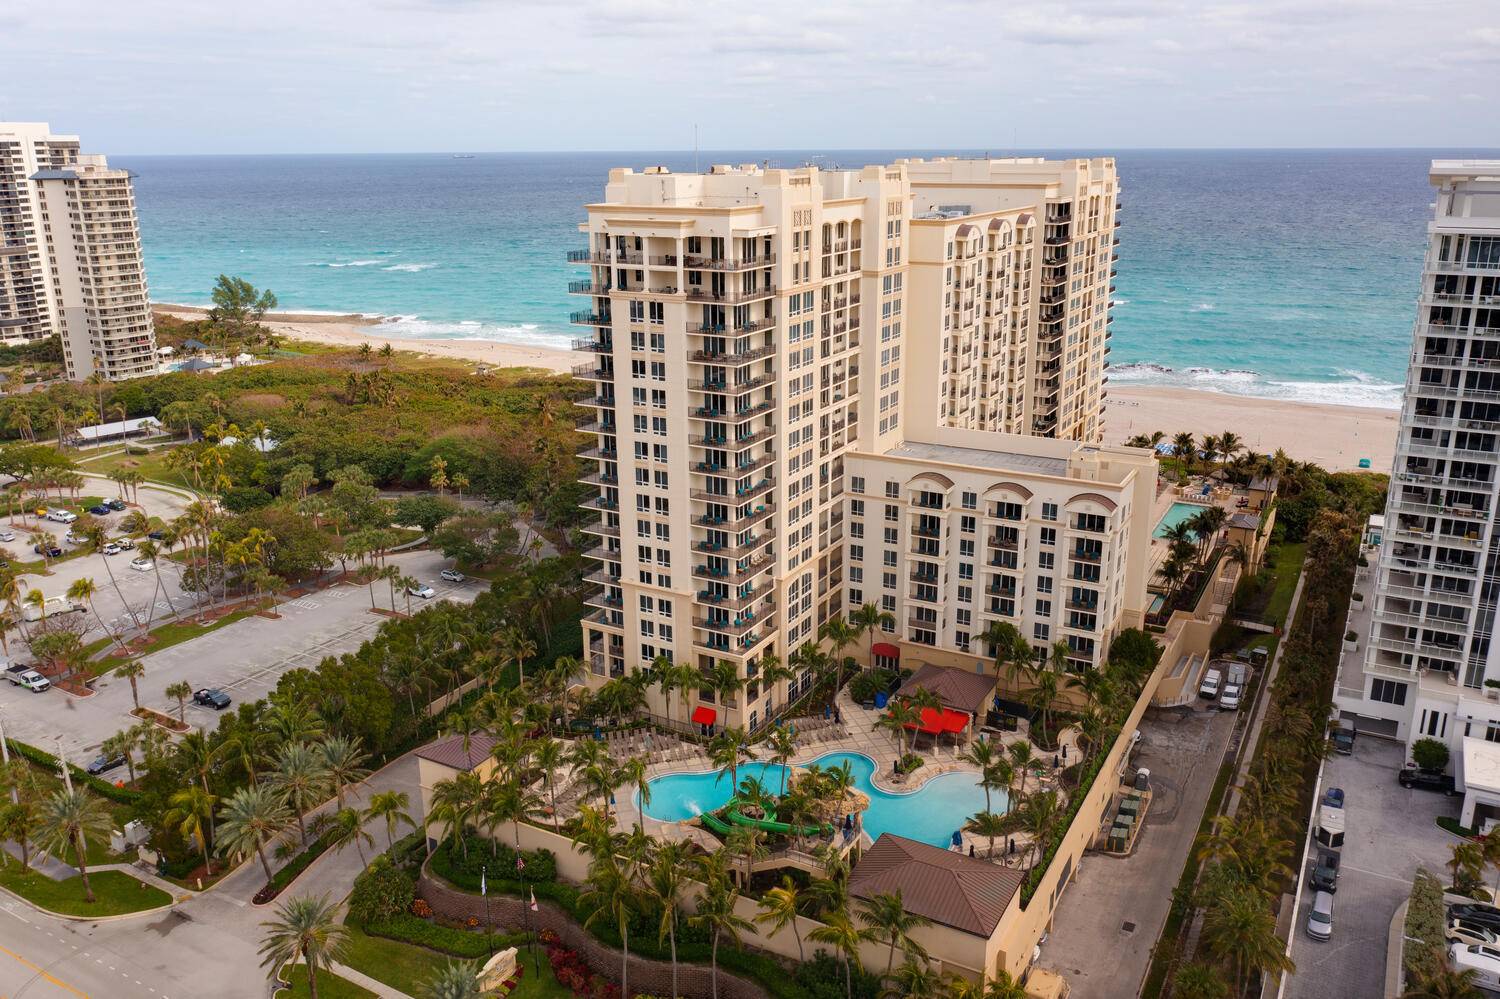 Indulge in the epitome of luxury living at the 4 Diamond Marriott Resort at Singer Island.